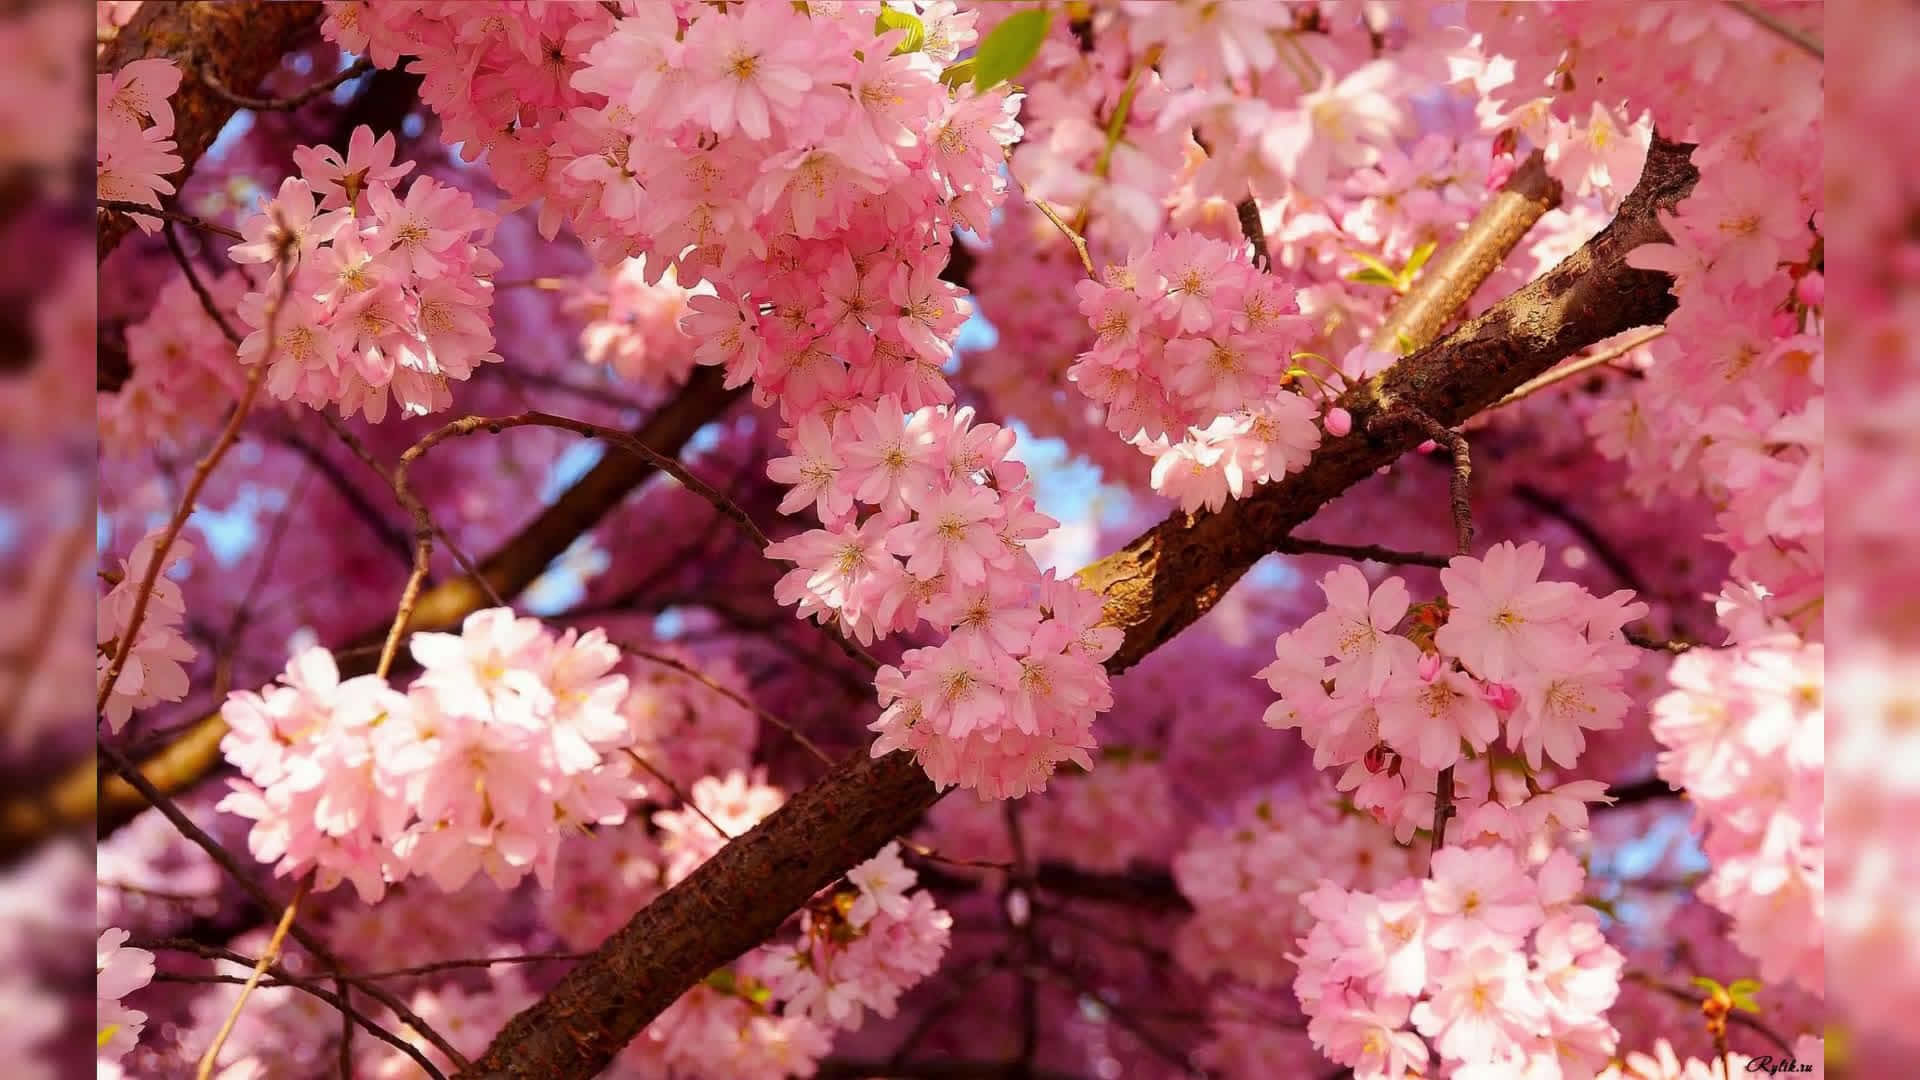 Enjoy the beauty of spring with this tranquil aesthetic desktop wallpaper Wallpaper